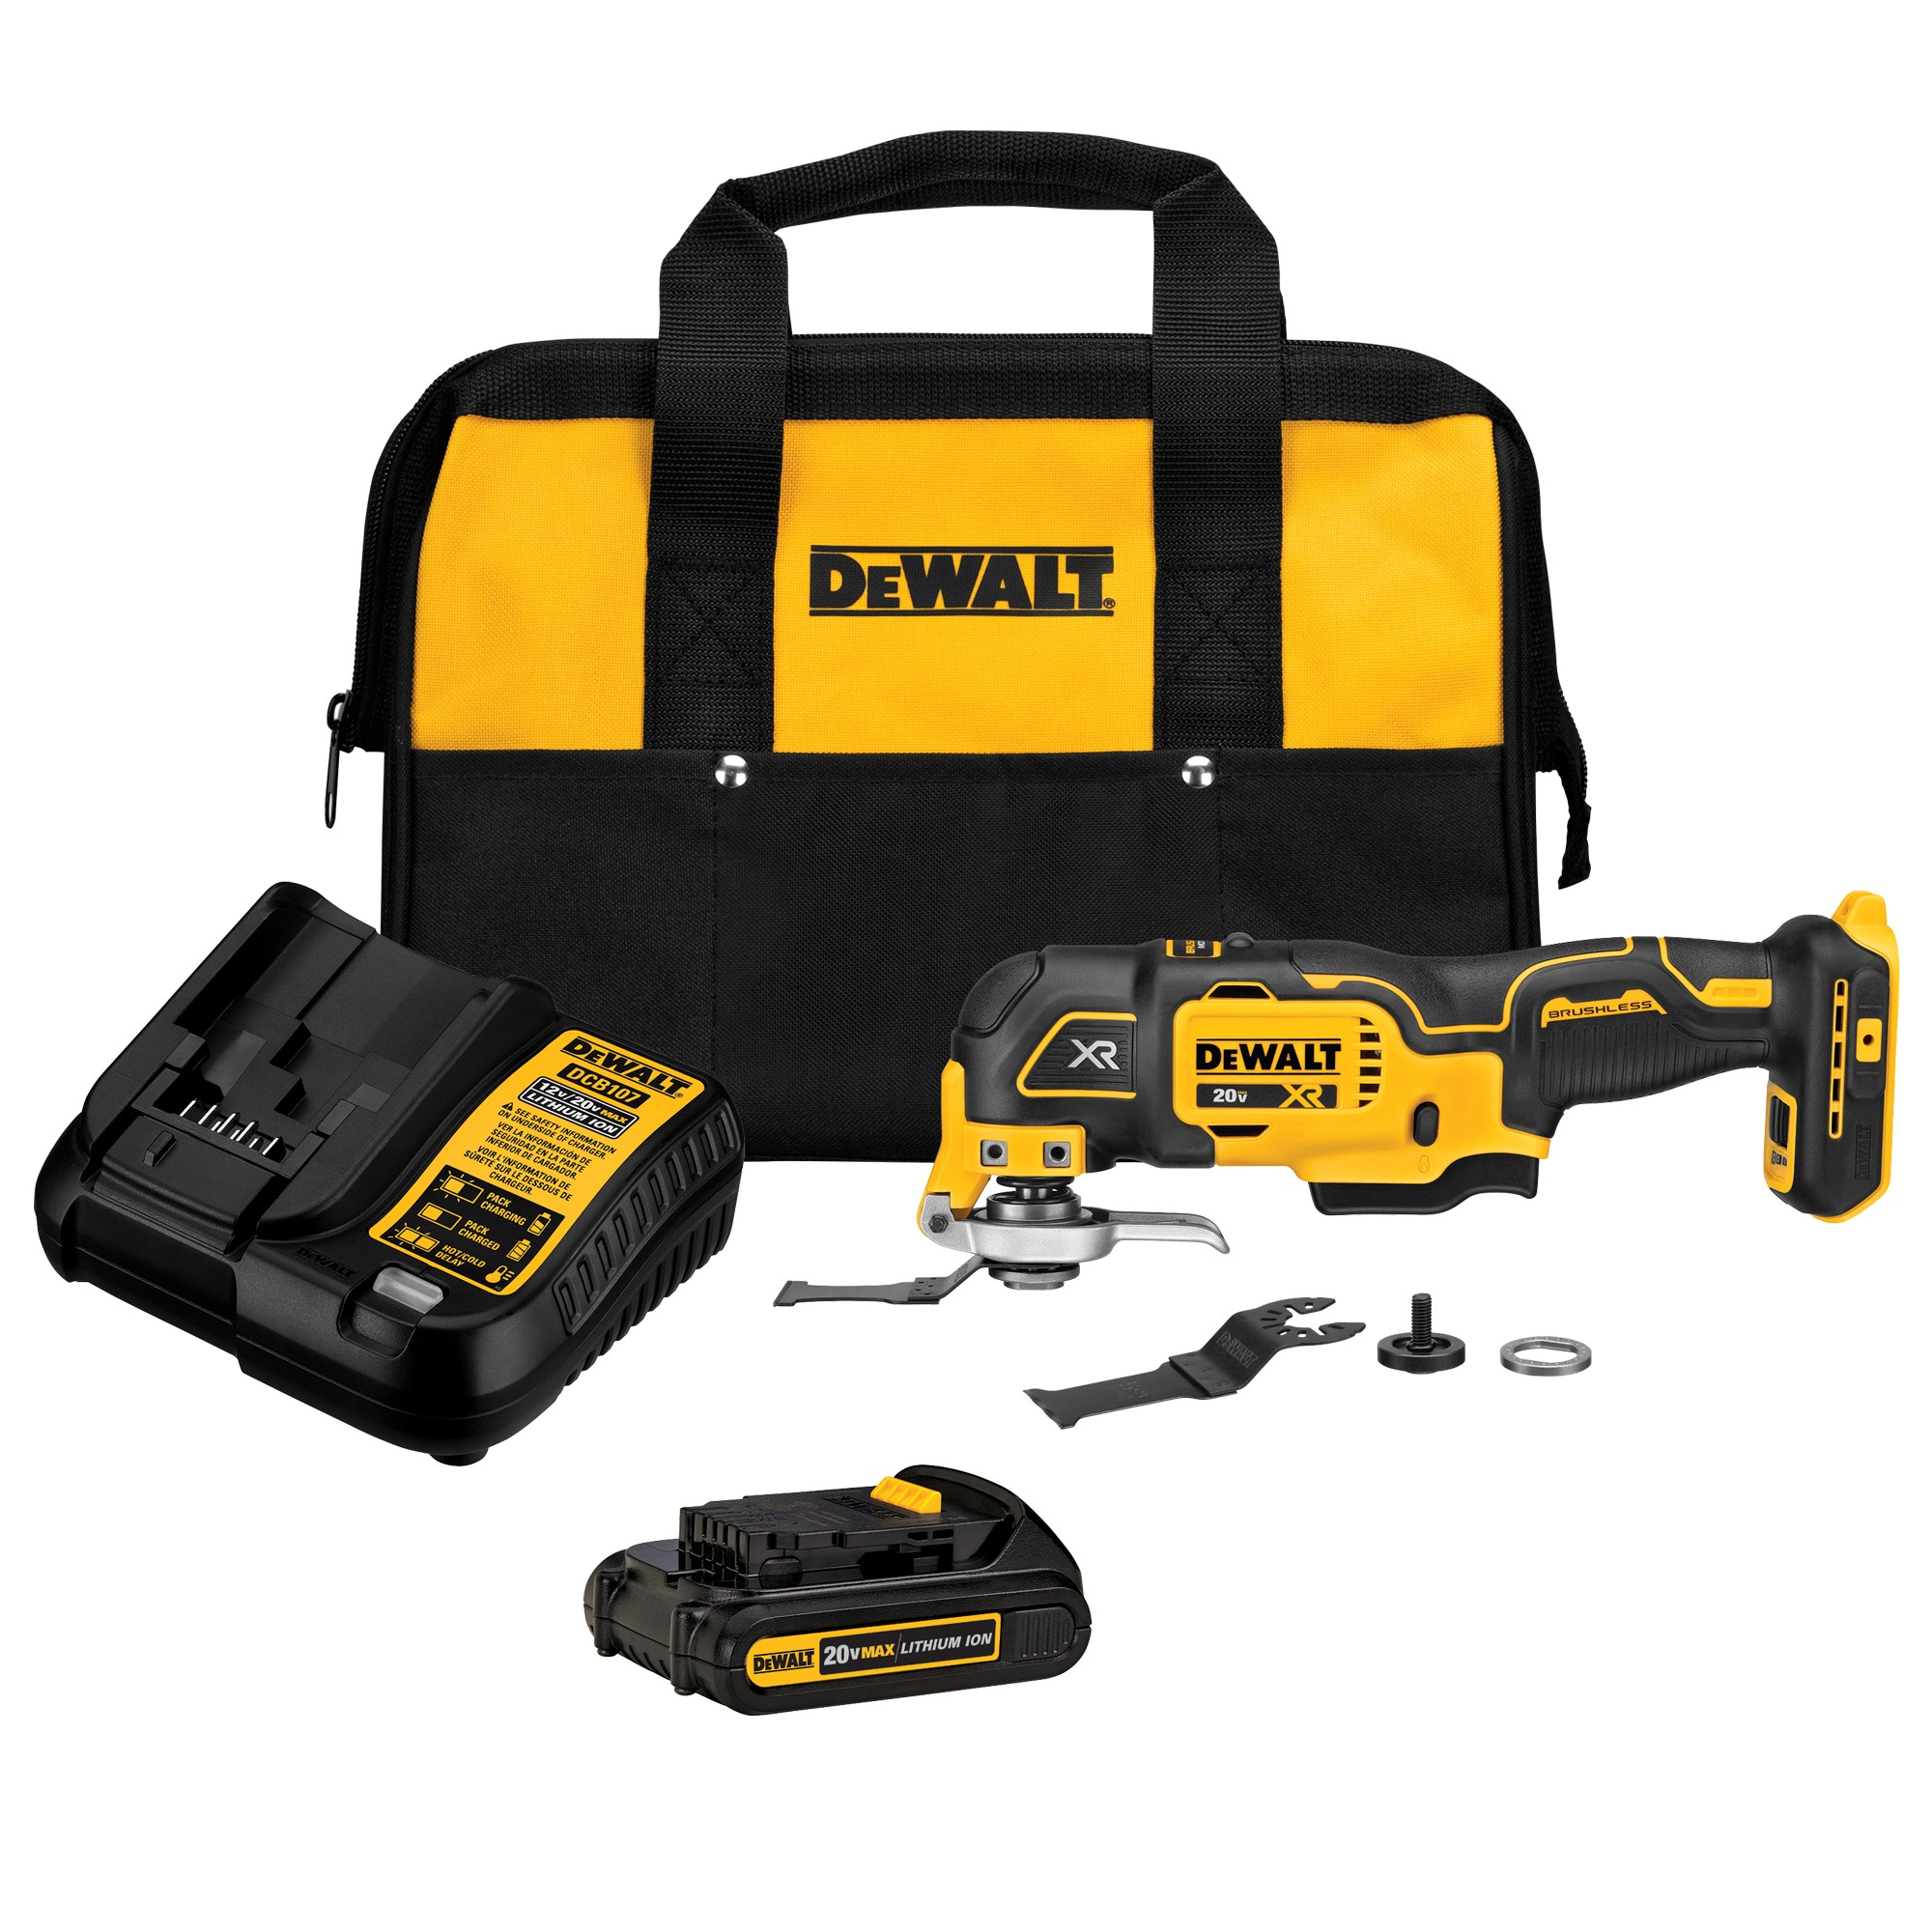 DEWALT 6-Piece Brushless 20-volt Max 3-speed Oscillating Multi-Tool Kit with Soft Case (1-Battery Included) | DCS356C1